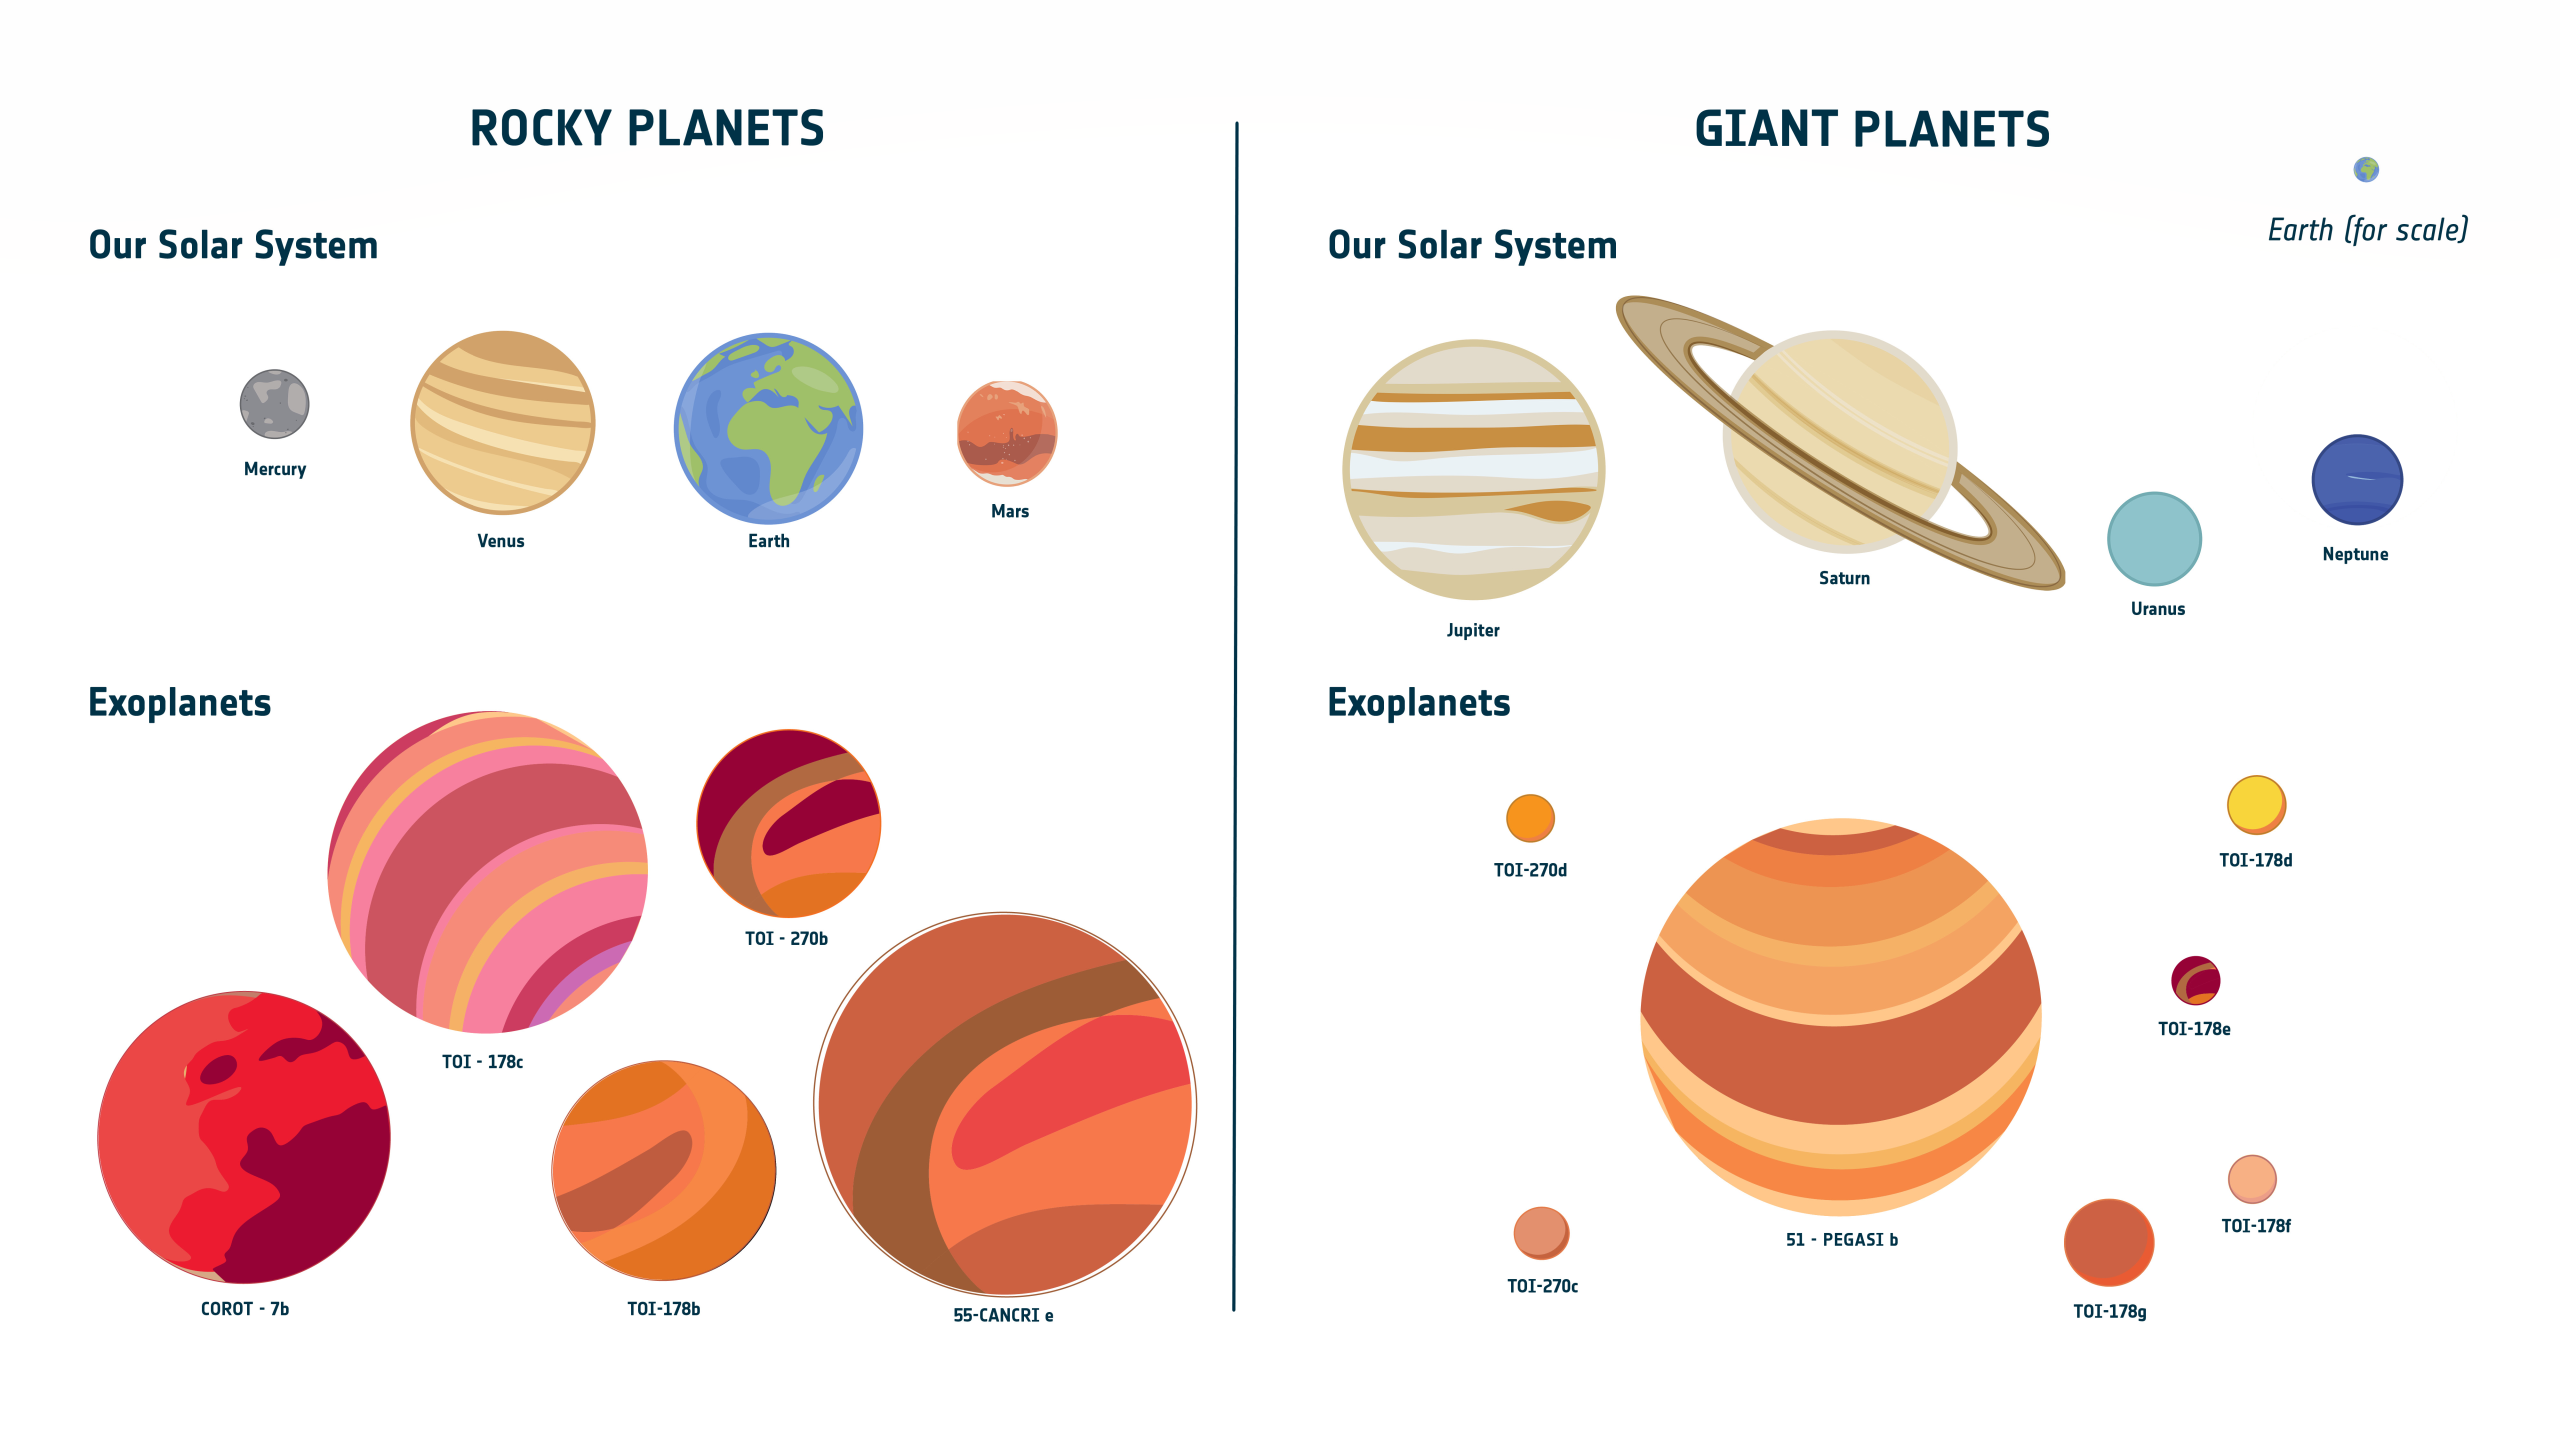 Examples of artists’ impressions of real exoplanets that have already been discovered orbiting nearby stars.